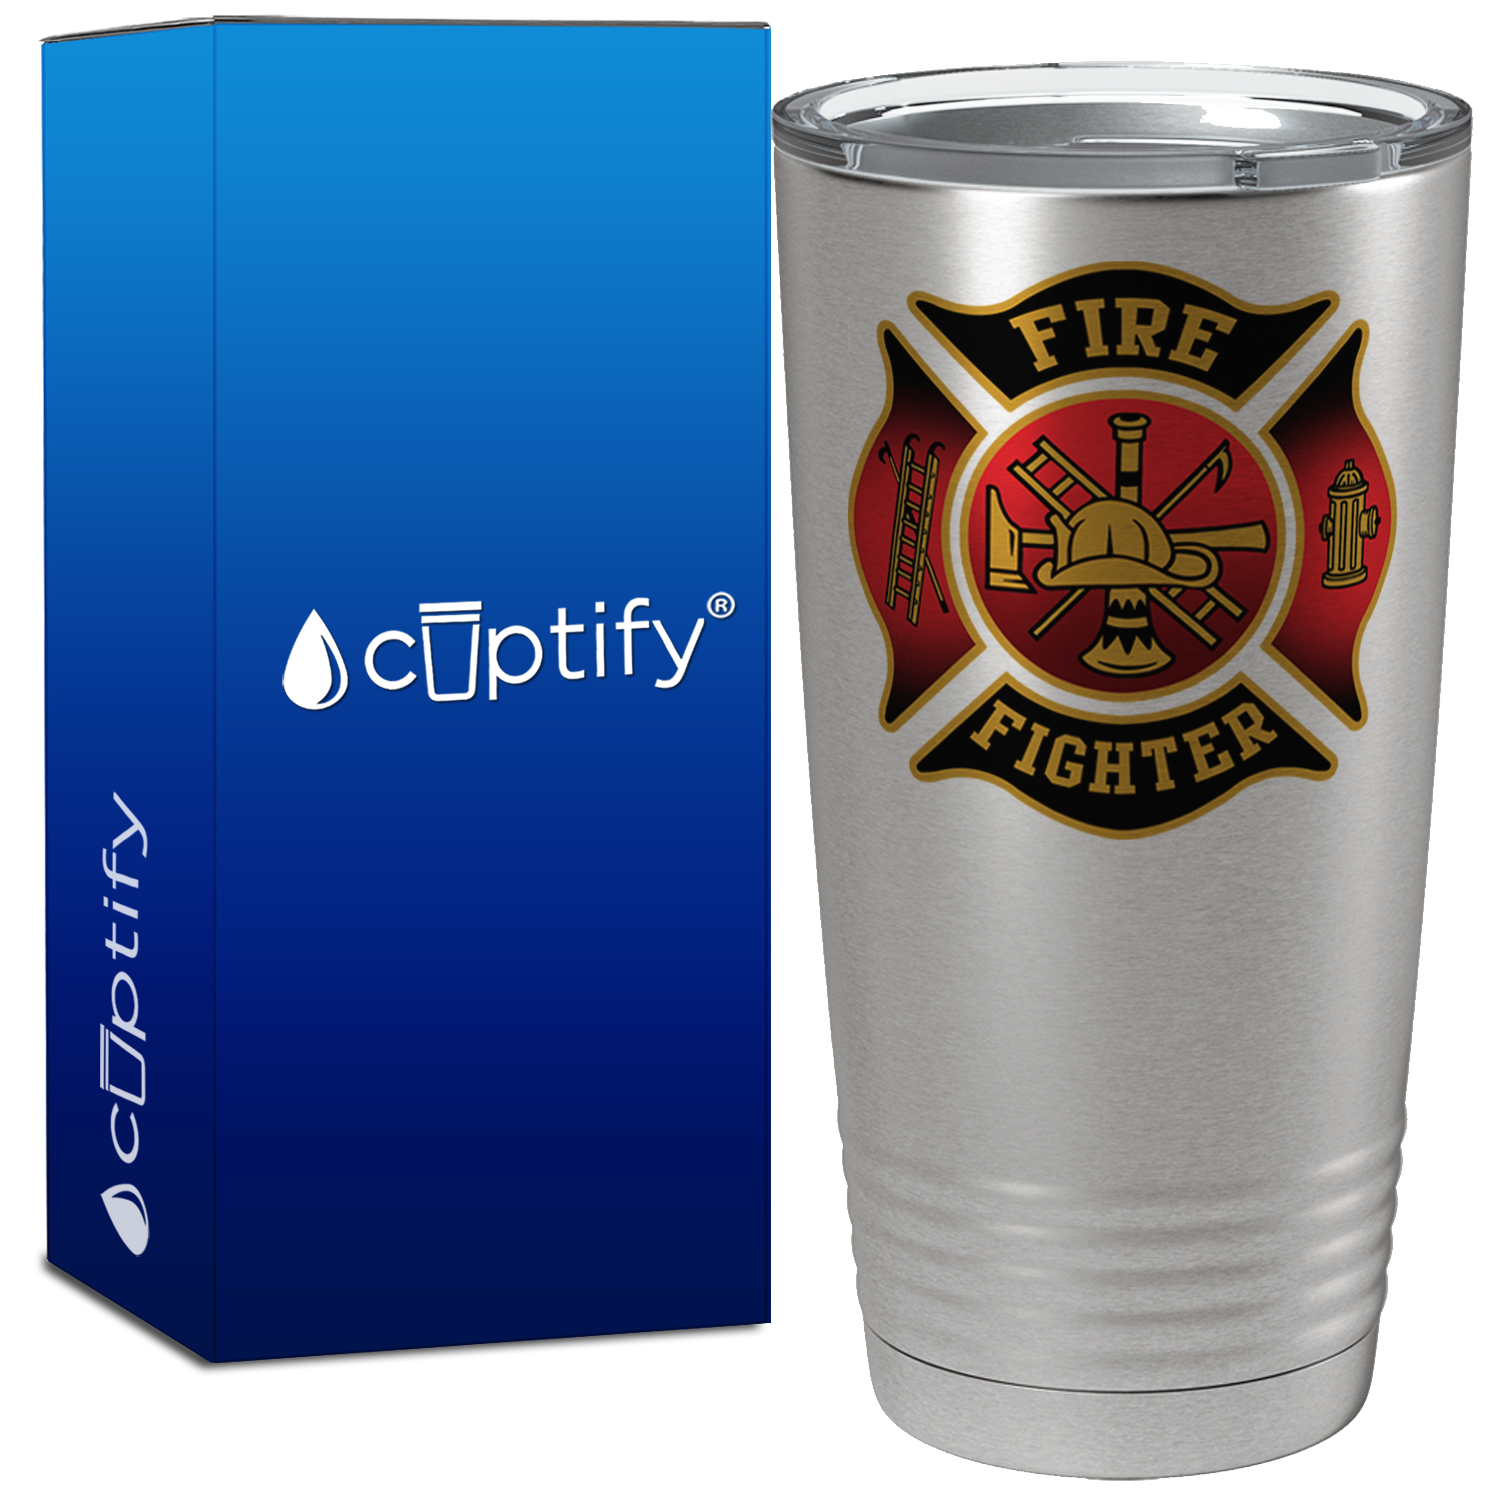 Red and Black Fire Department Badge on Stainless Tumbler